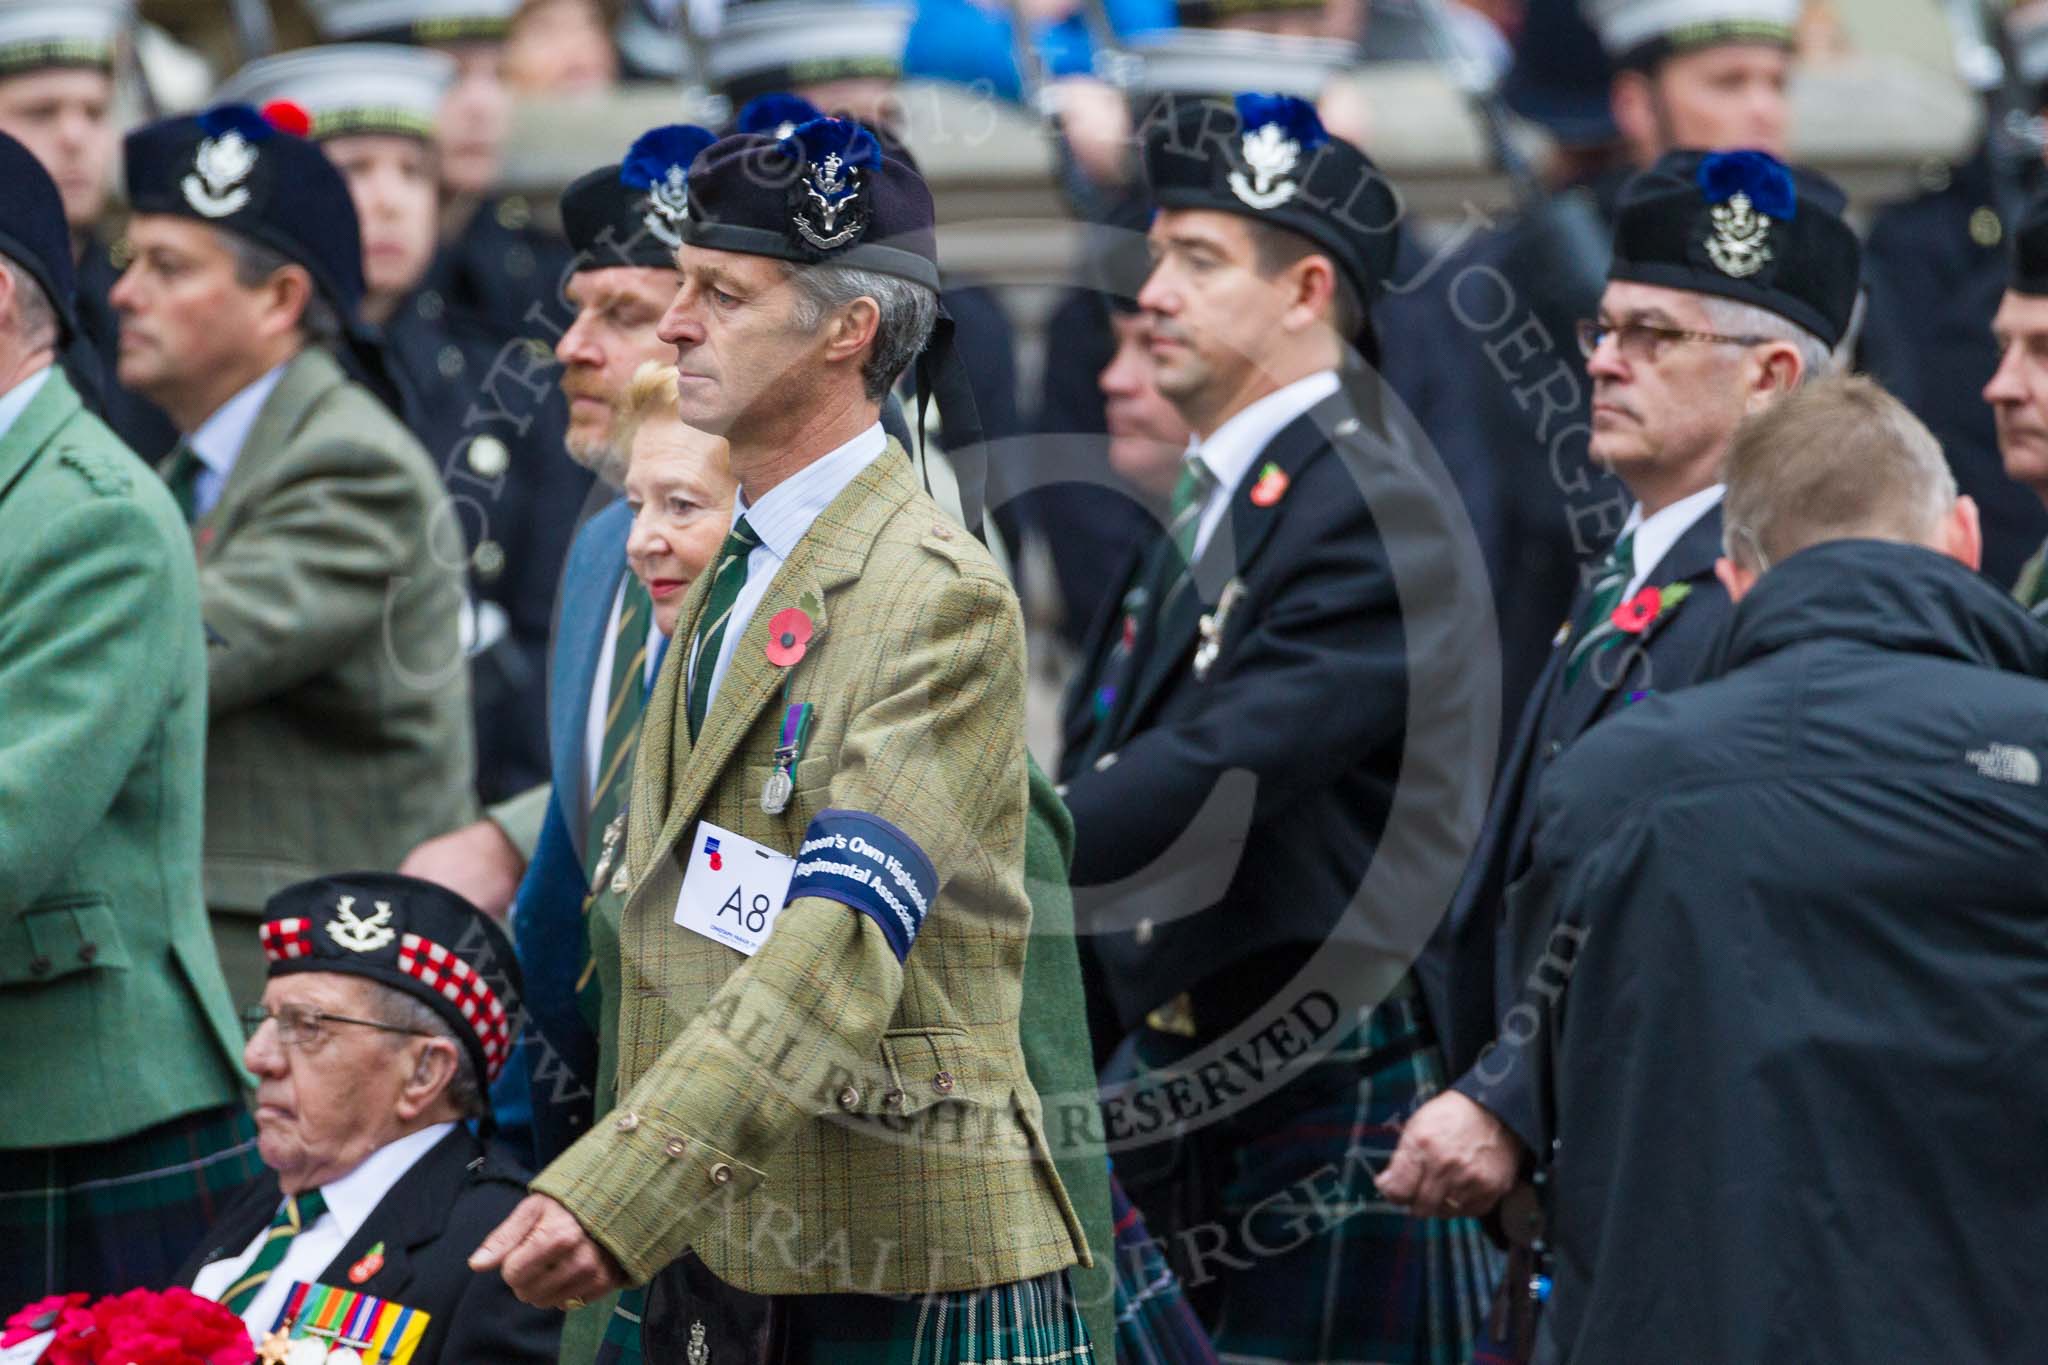 Remembrance Sunday at the Cenotaph 2015: Group A8, Queen's Own Highlanders Regimental Association.
Cenotaph, Whitehall, London SW1,
London,
Greater London,
United Kingdom,
on 08 November 2015 at 12:10, image #1231